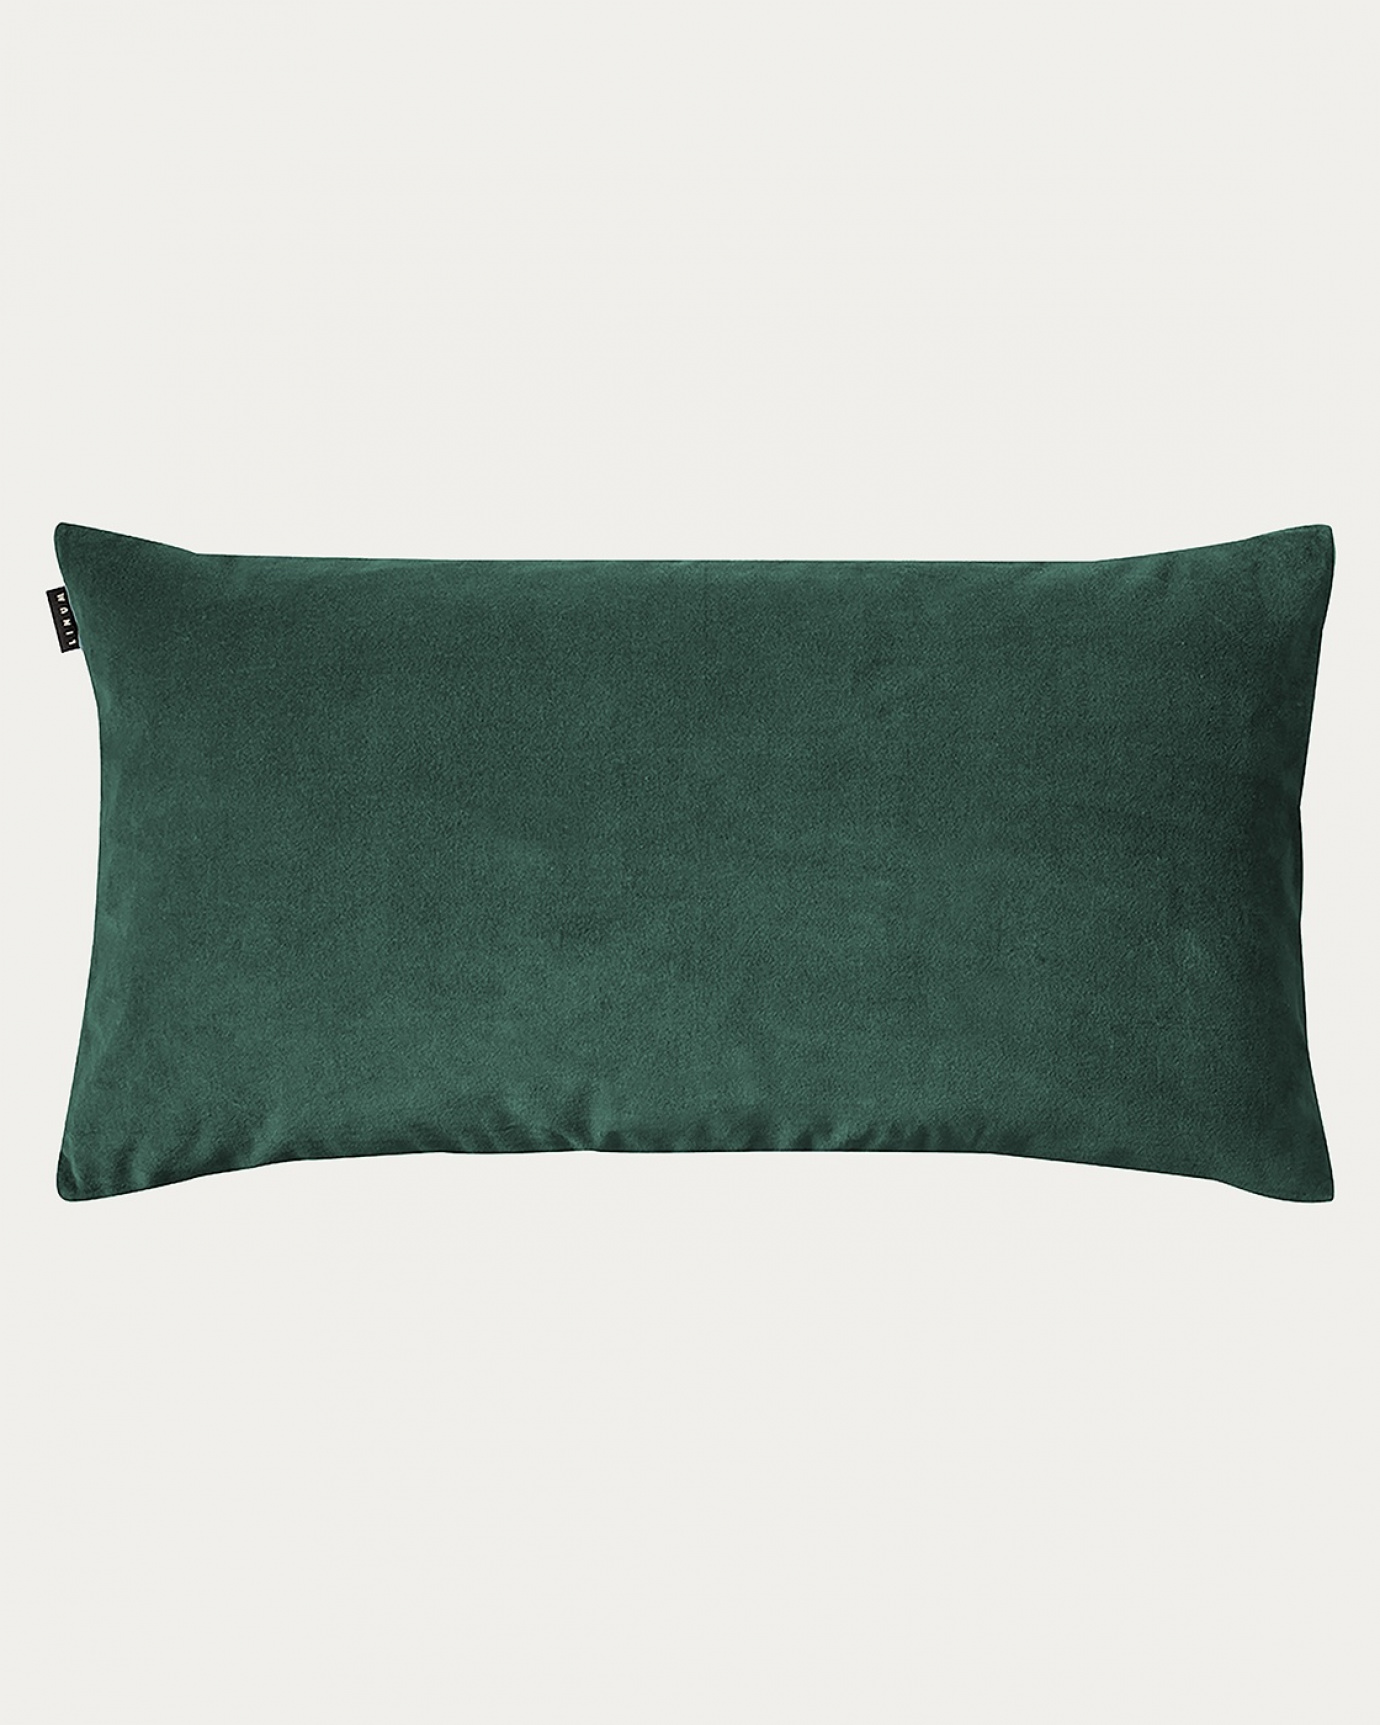 Product image deep emerald green PAOLO cushion cover made of soft cotton velvet and 100% linen from LINUM DESIGN. Size 50x90 cm.